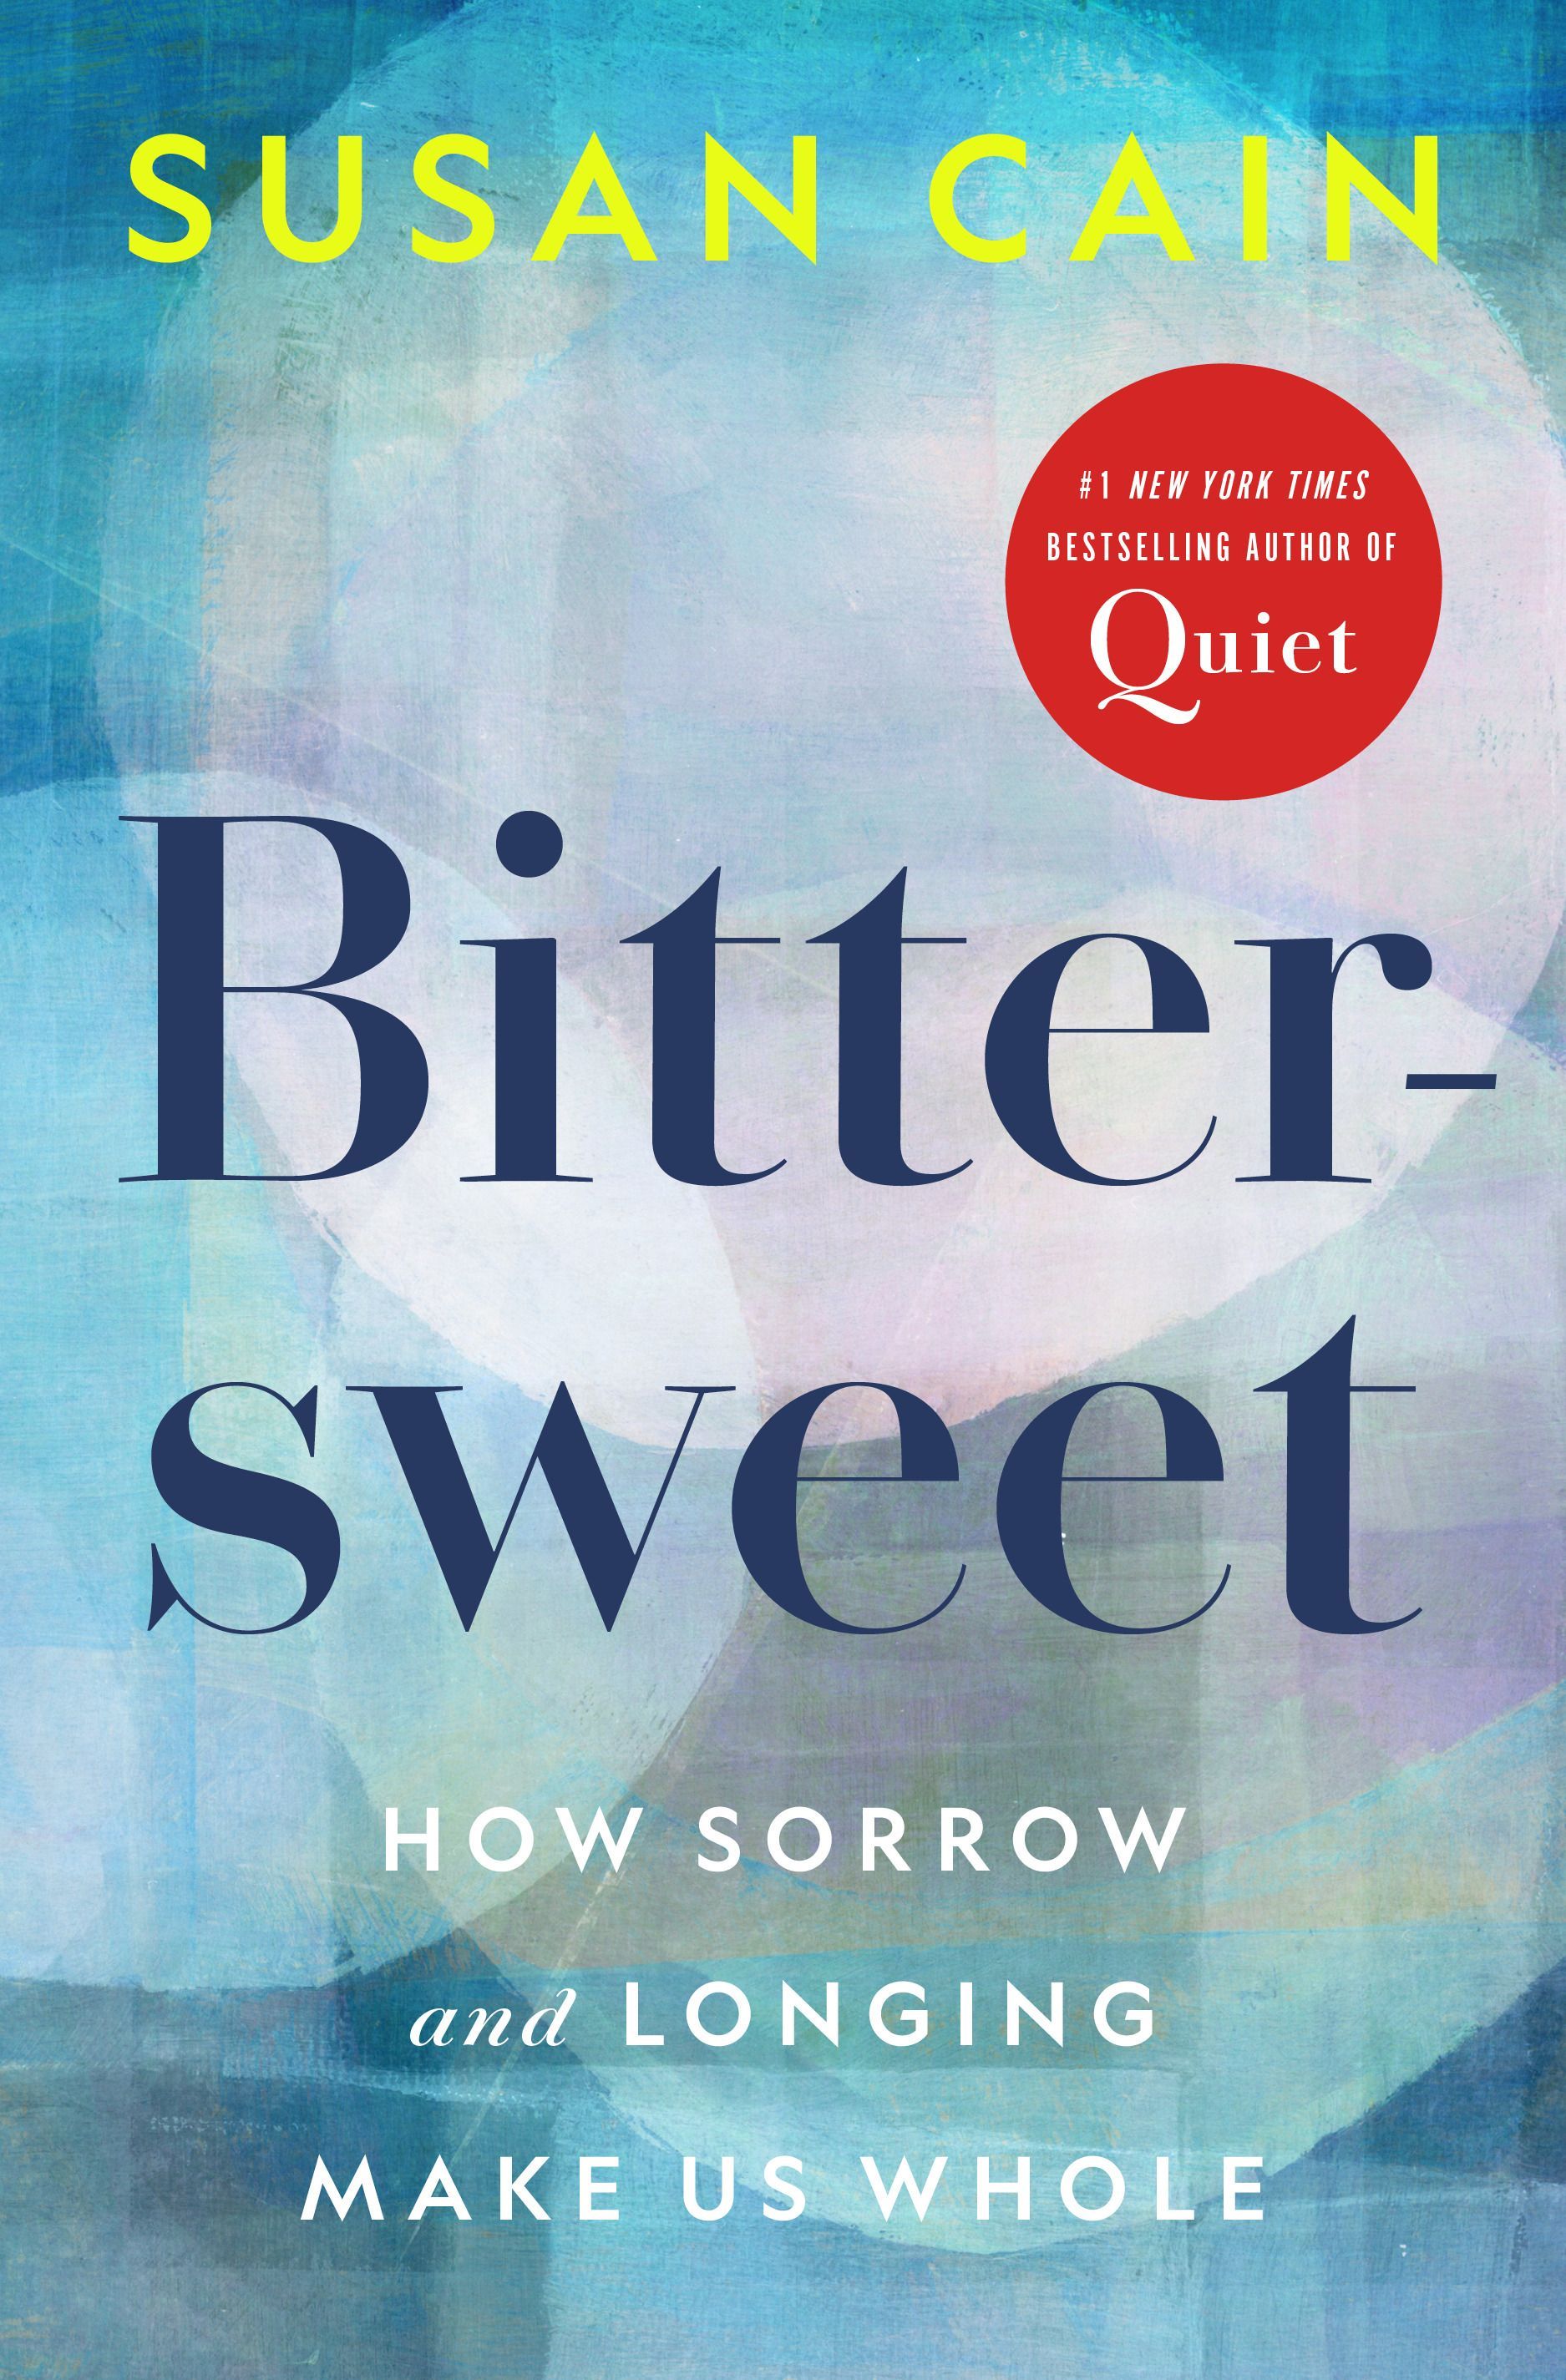 'Bittersweet' by Susan Cain